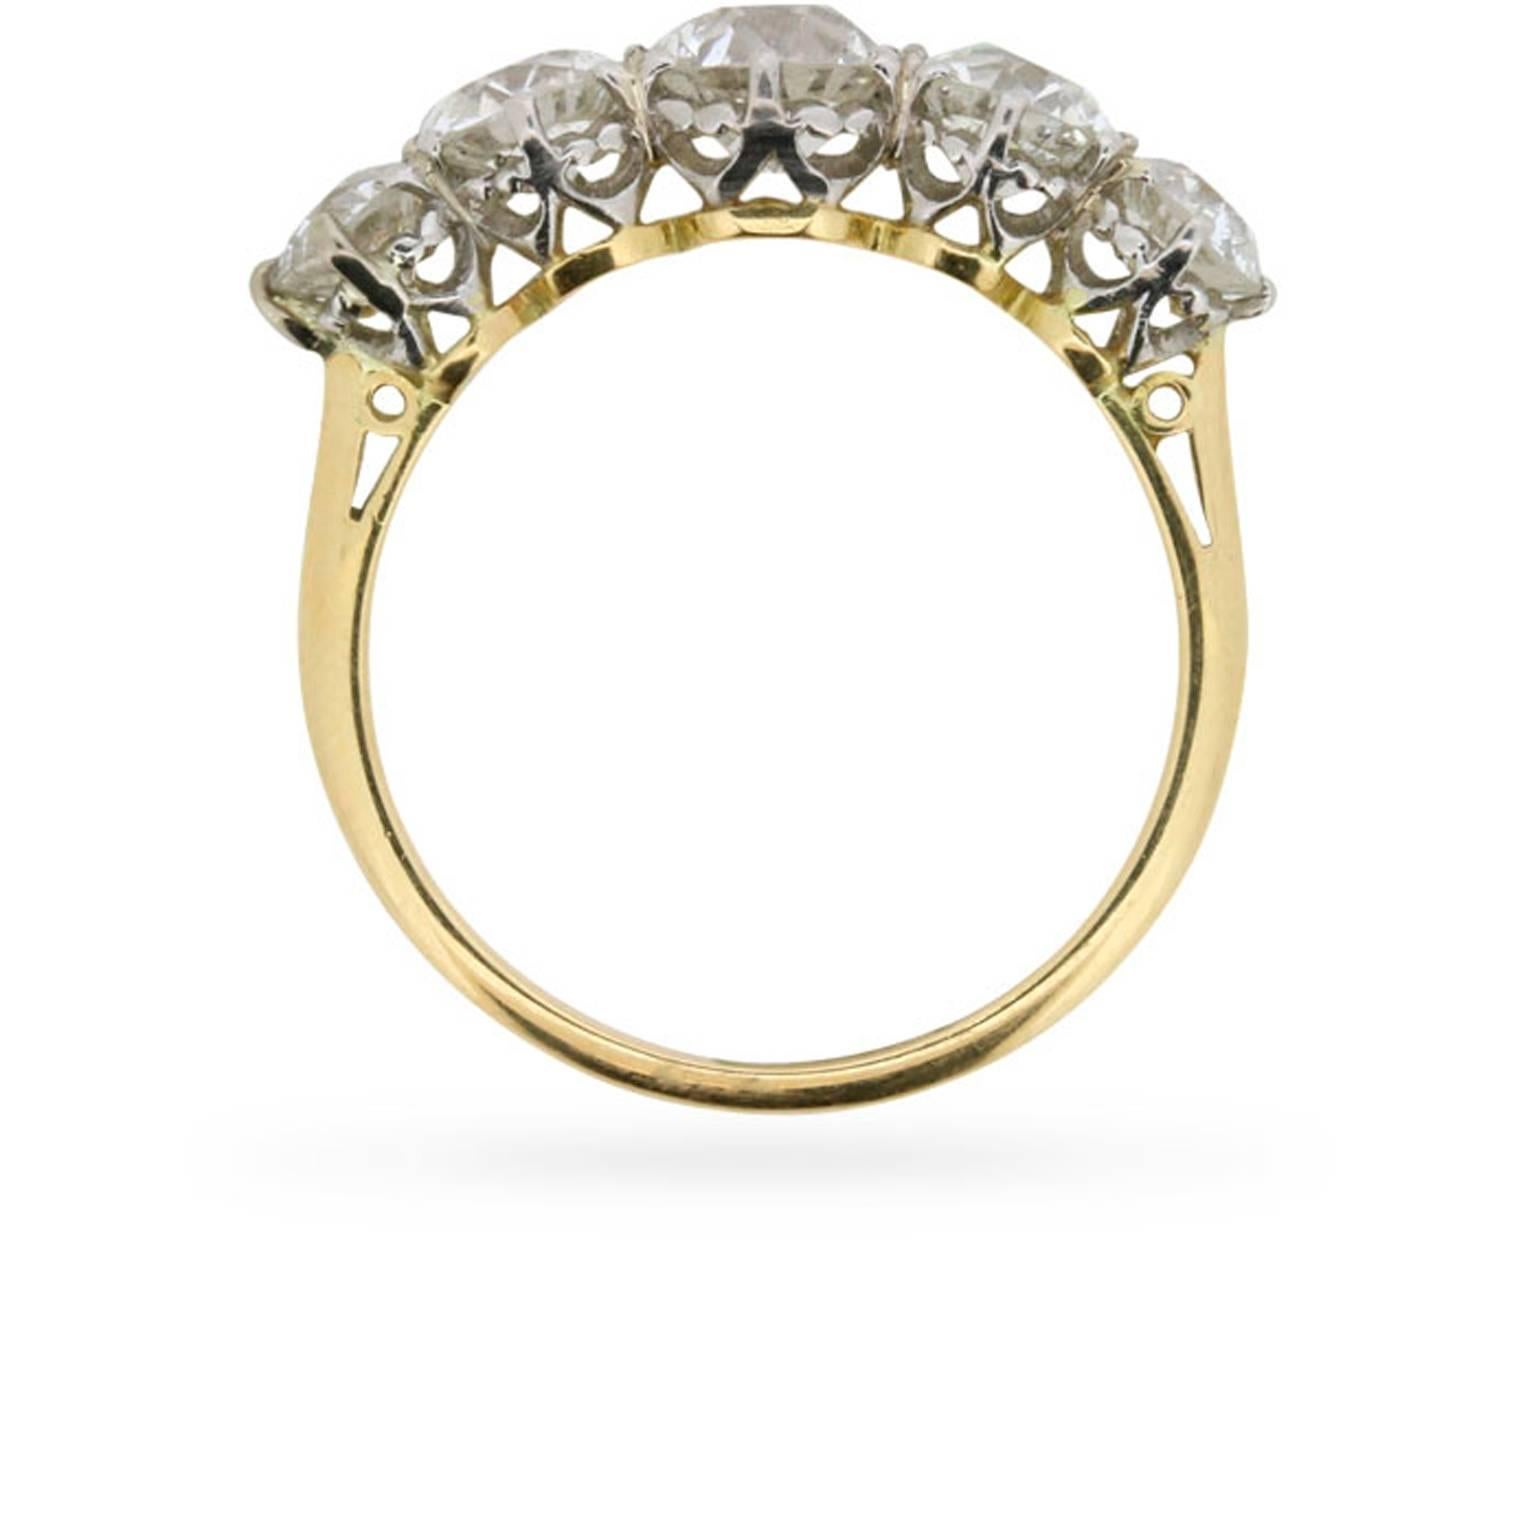 Originating in the 1910s, a gorgeous 2.20 carats of old cut diamonds are set shoulder to shoulder to comprise the heart of this antique diamond ring.

This ring was designed in perfect balance with a 0.70 carat diamond at its centre, and a 0.45